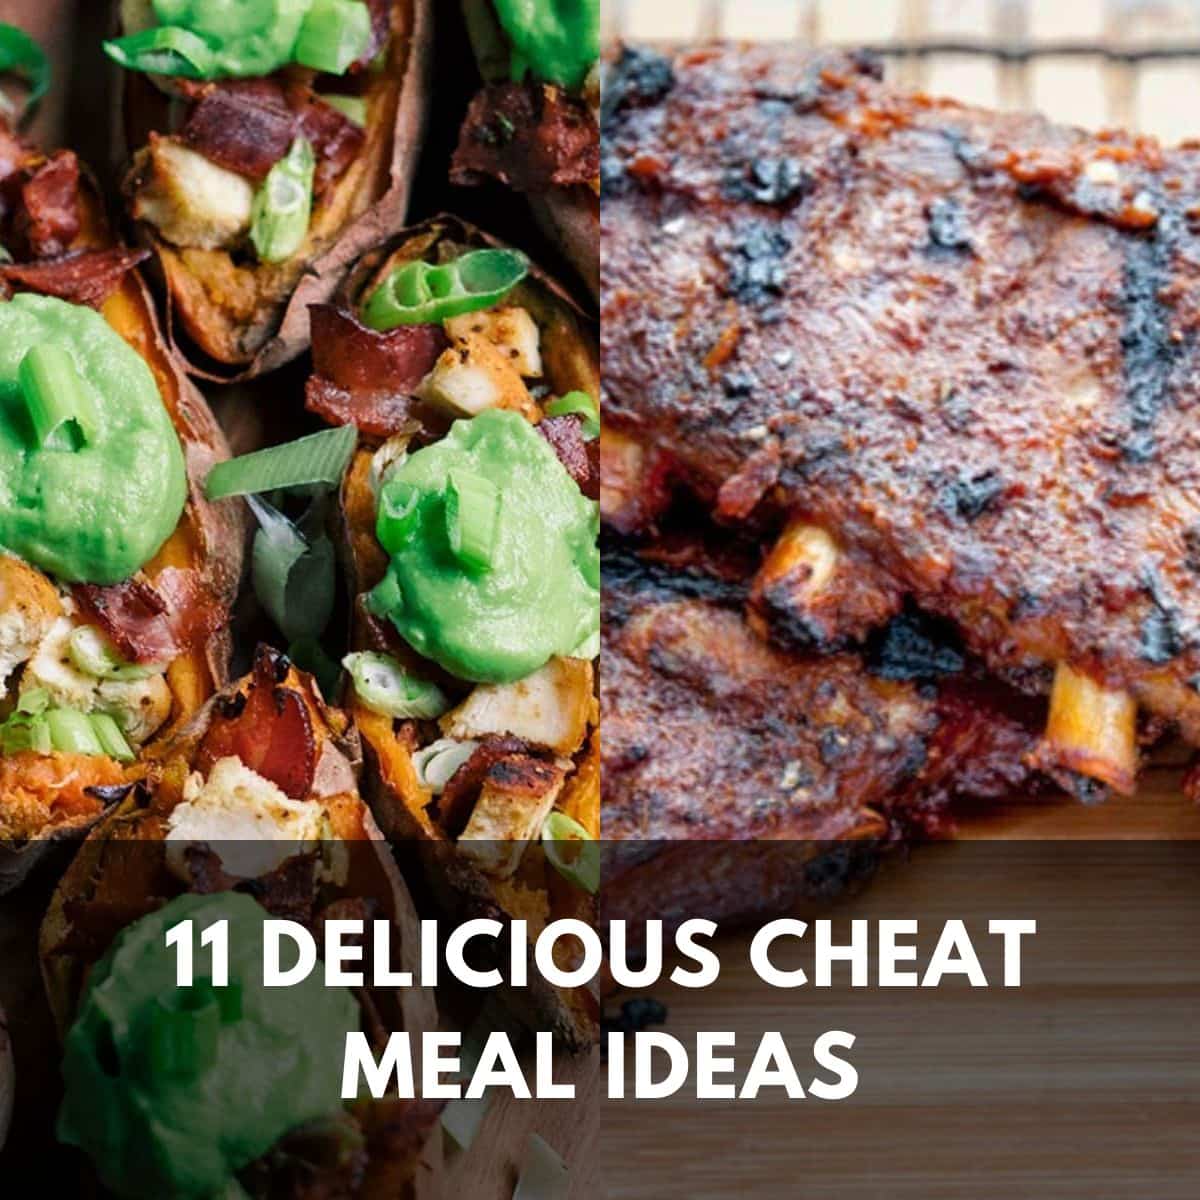 11 delicious cheat meal ideas main